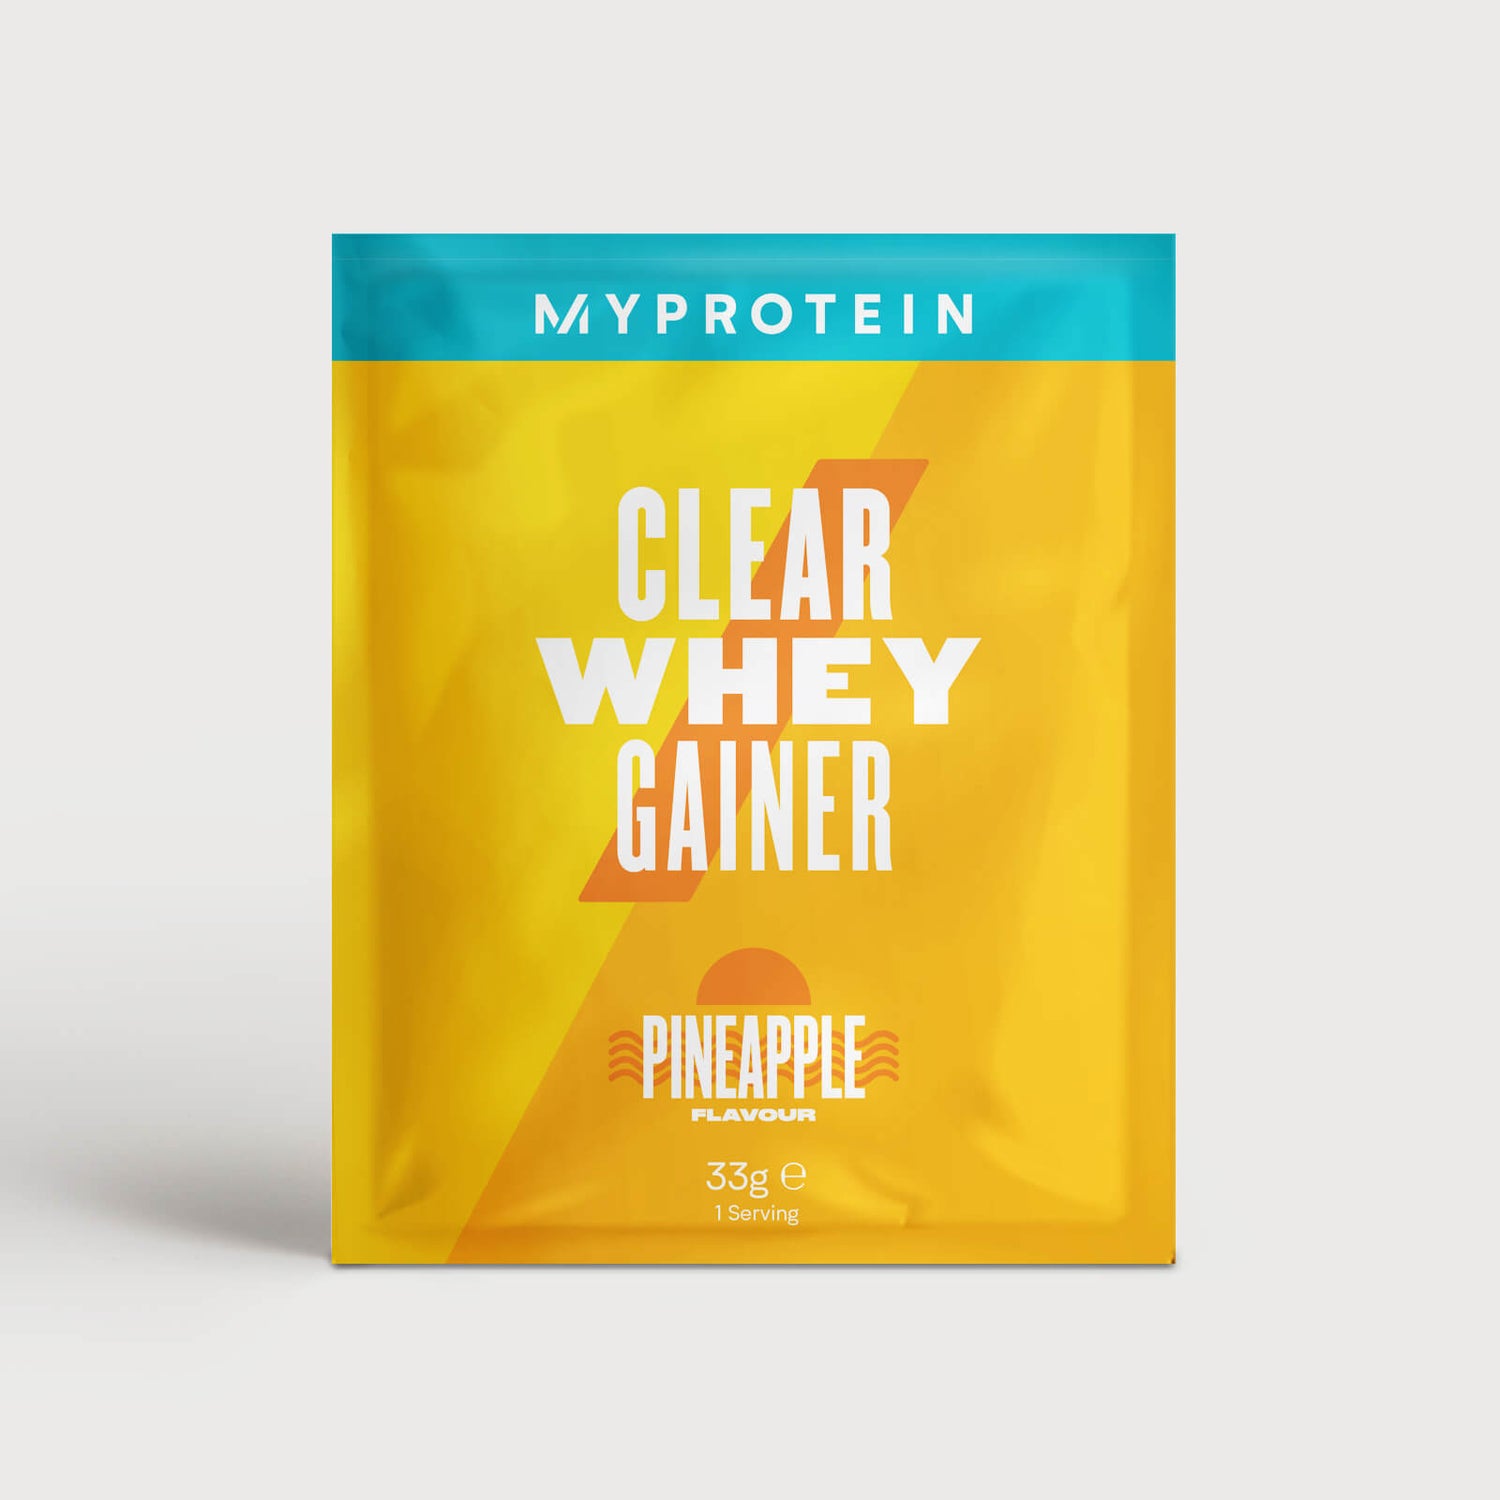 Clear Whey Gainer (Sample) - 1servings - Ananas